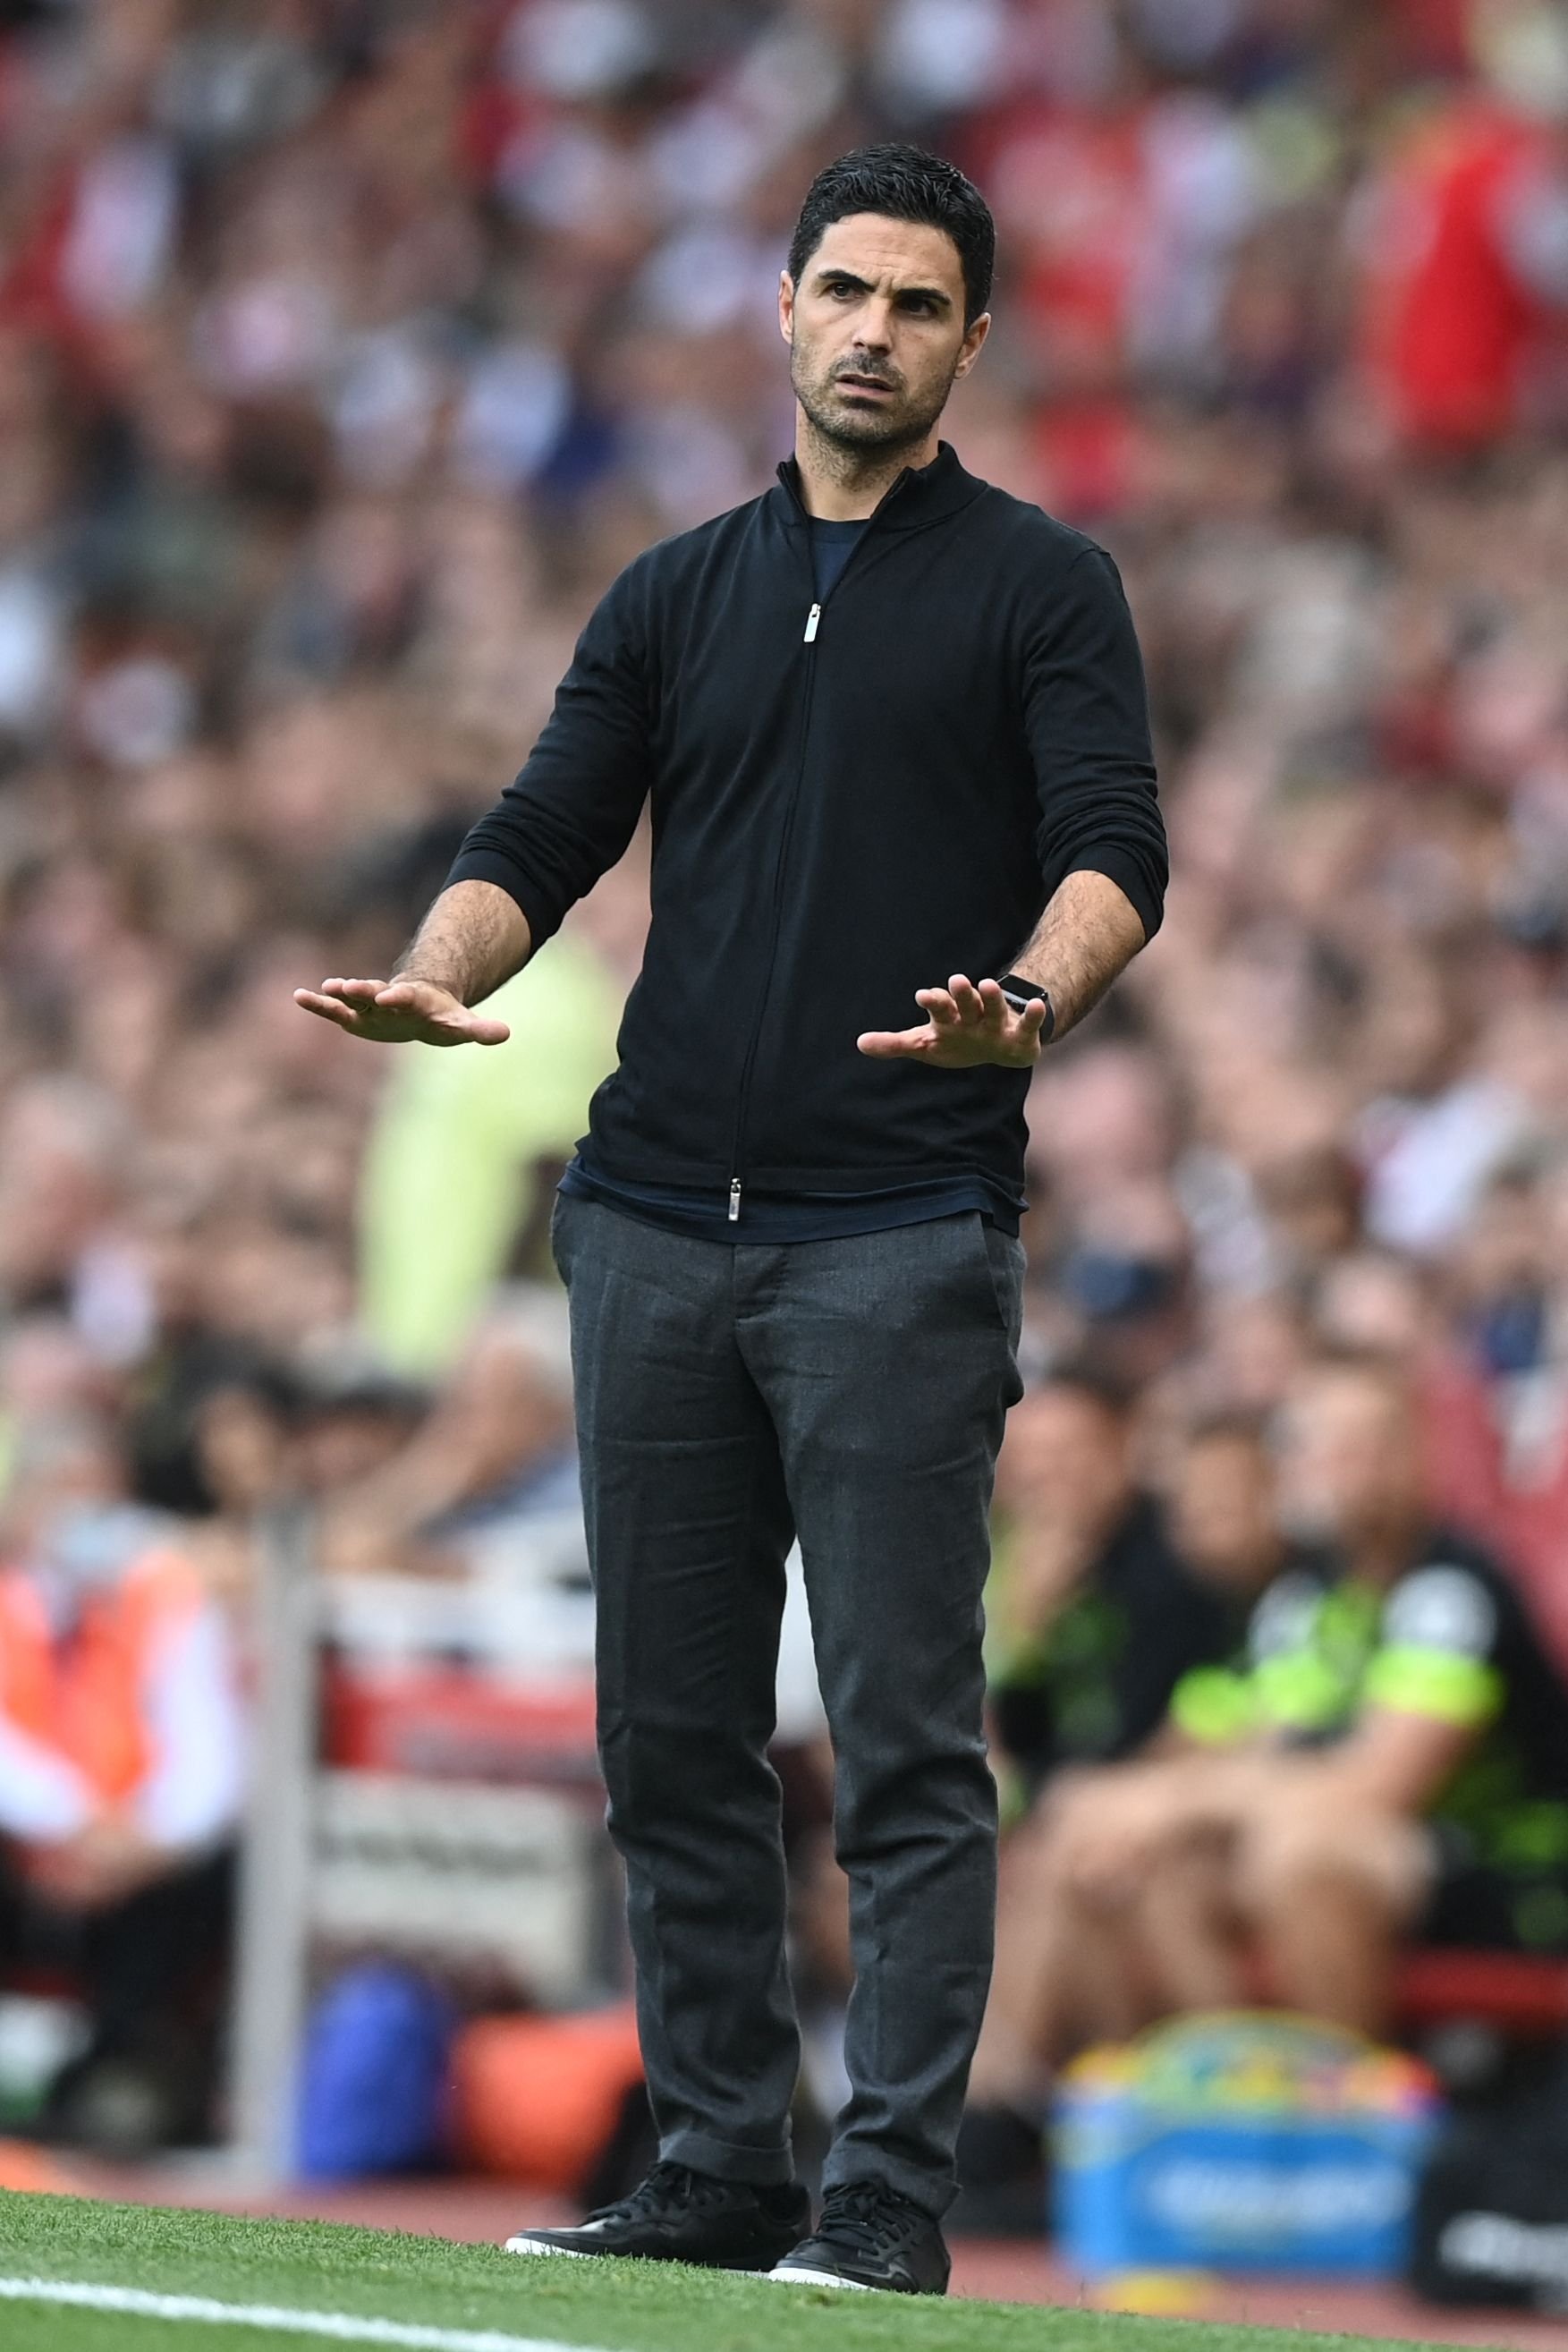 Arsenal's Spanish manager Mikel Arteta gestures during a Premier League match against Norwich City at the Emirates Stadium, London, England, Sept. 11, 2021. (AFP Photo)